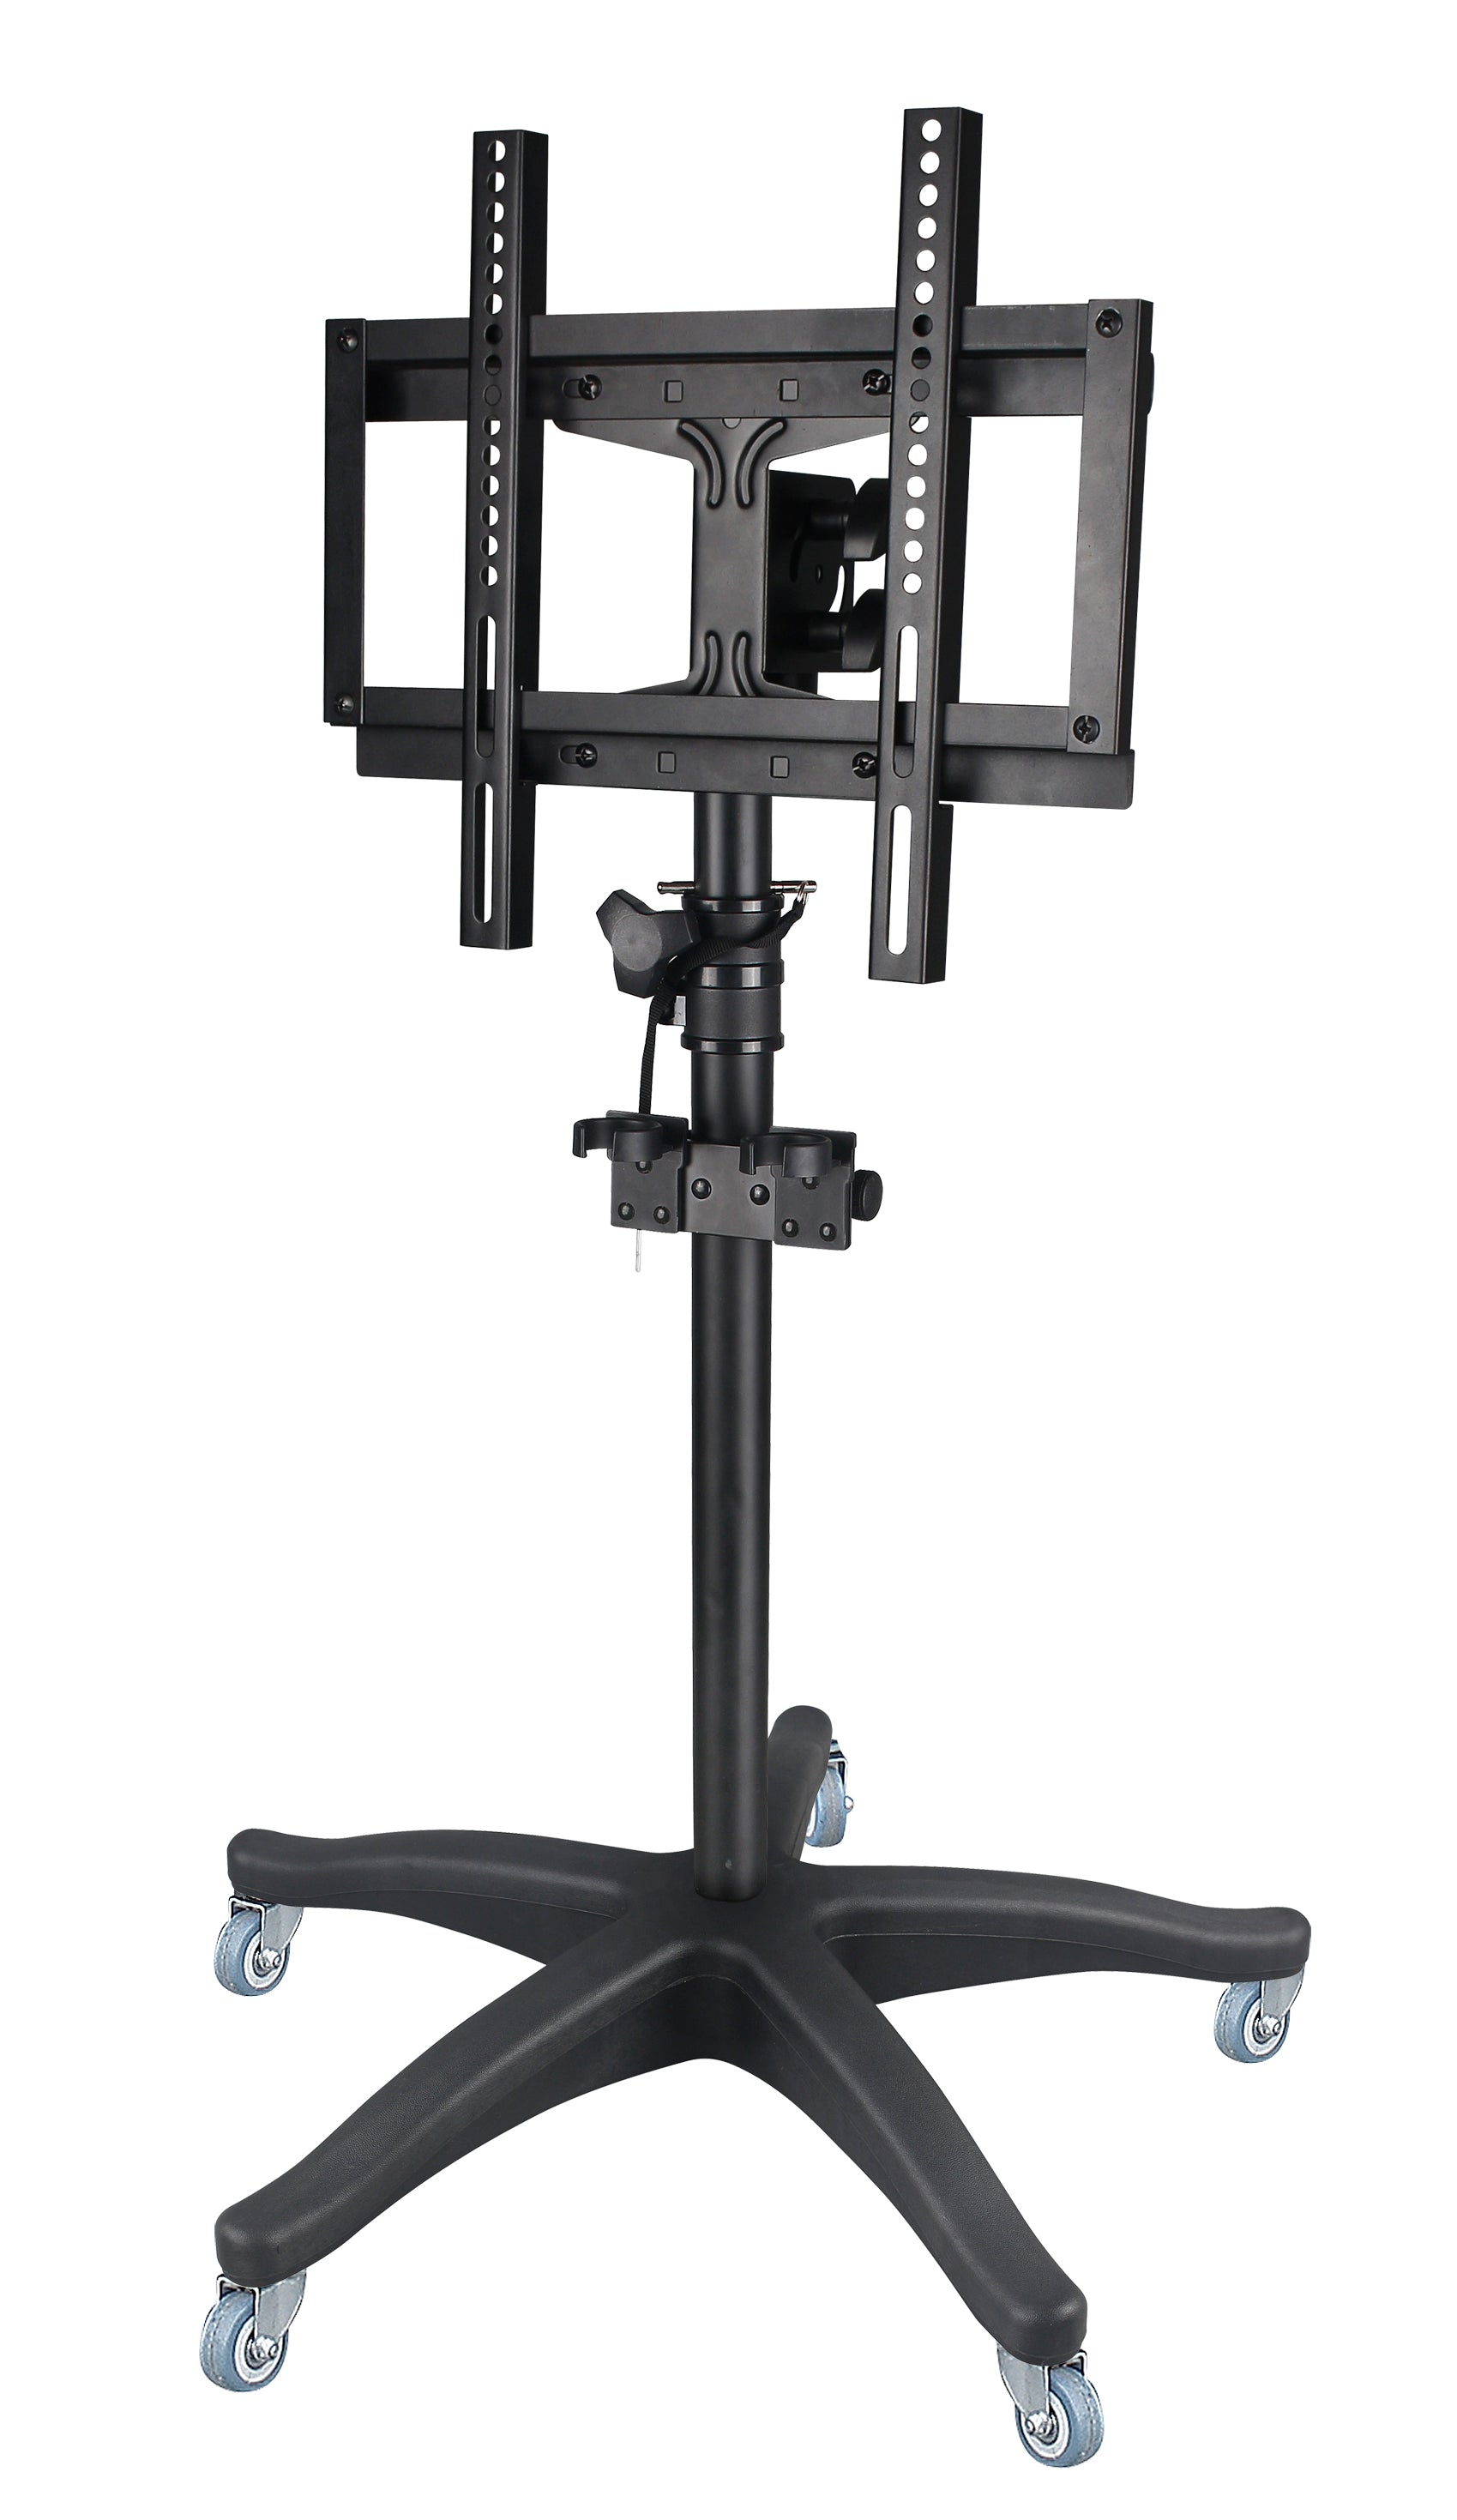 64-1208 Universal Mobile Floor Stand Bracket for 14"-32" LCD TV, up to 25kgs loading weight